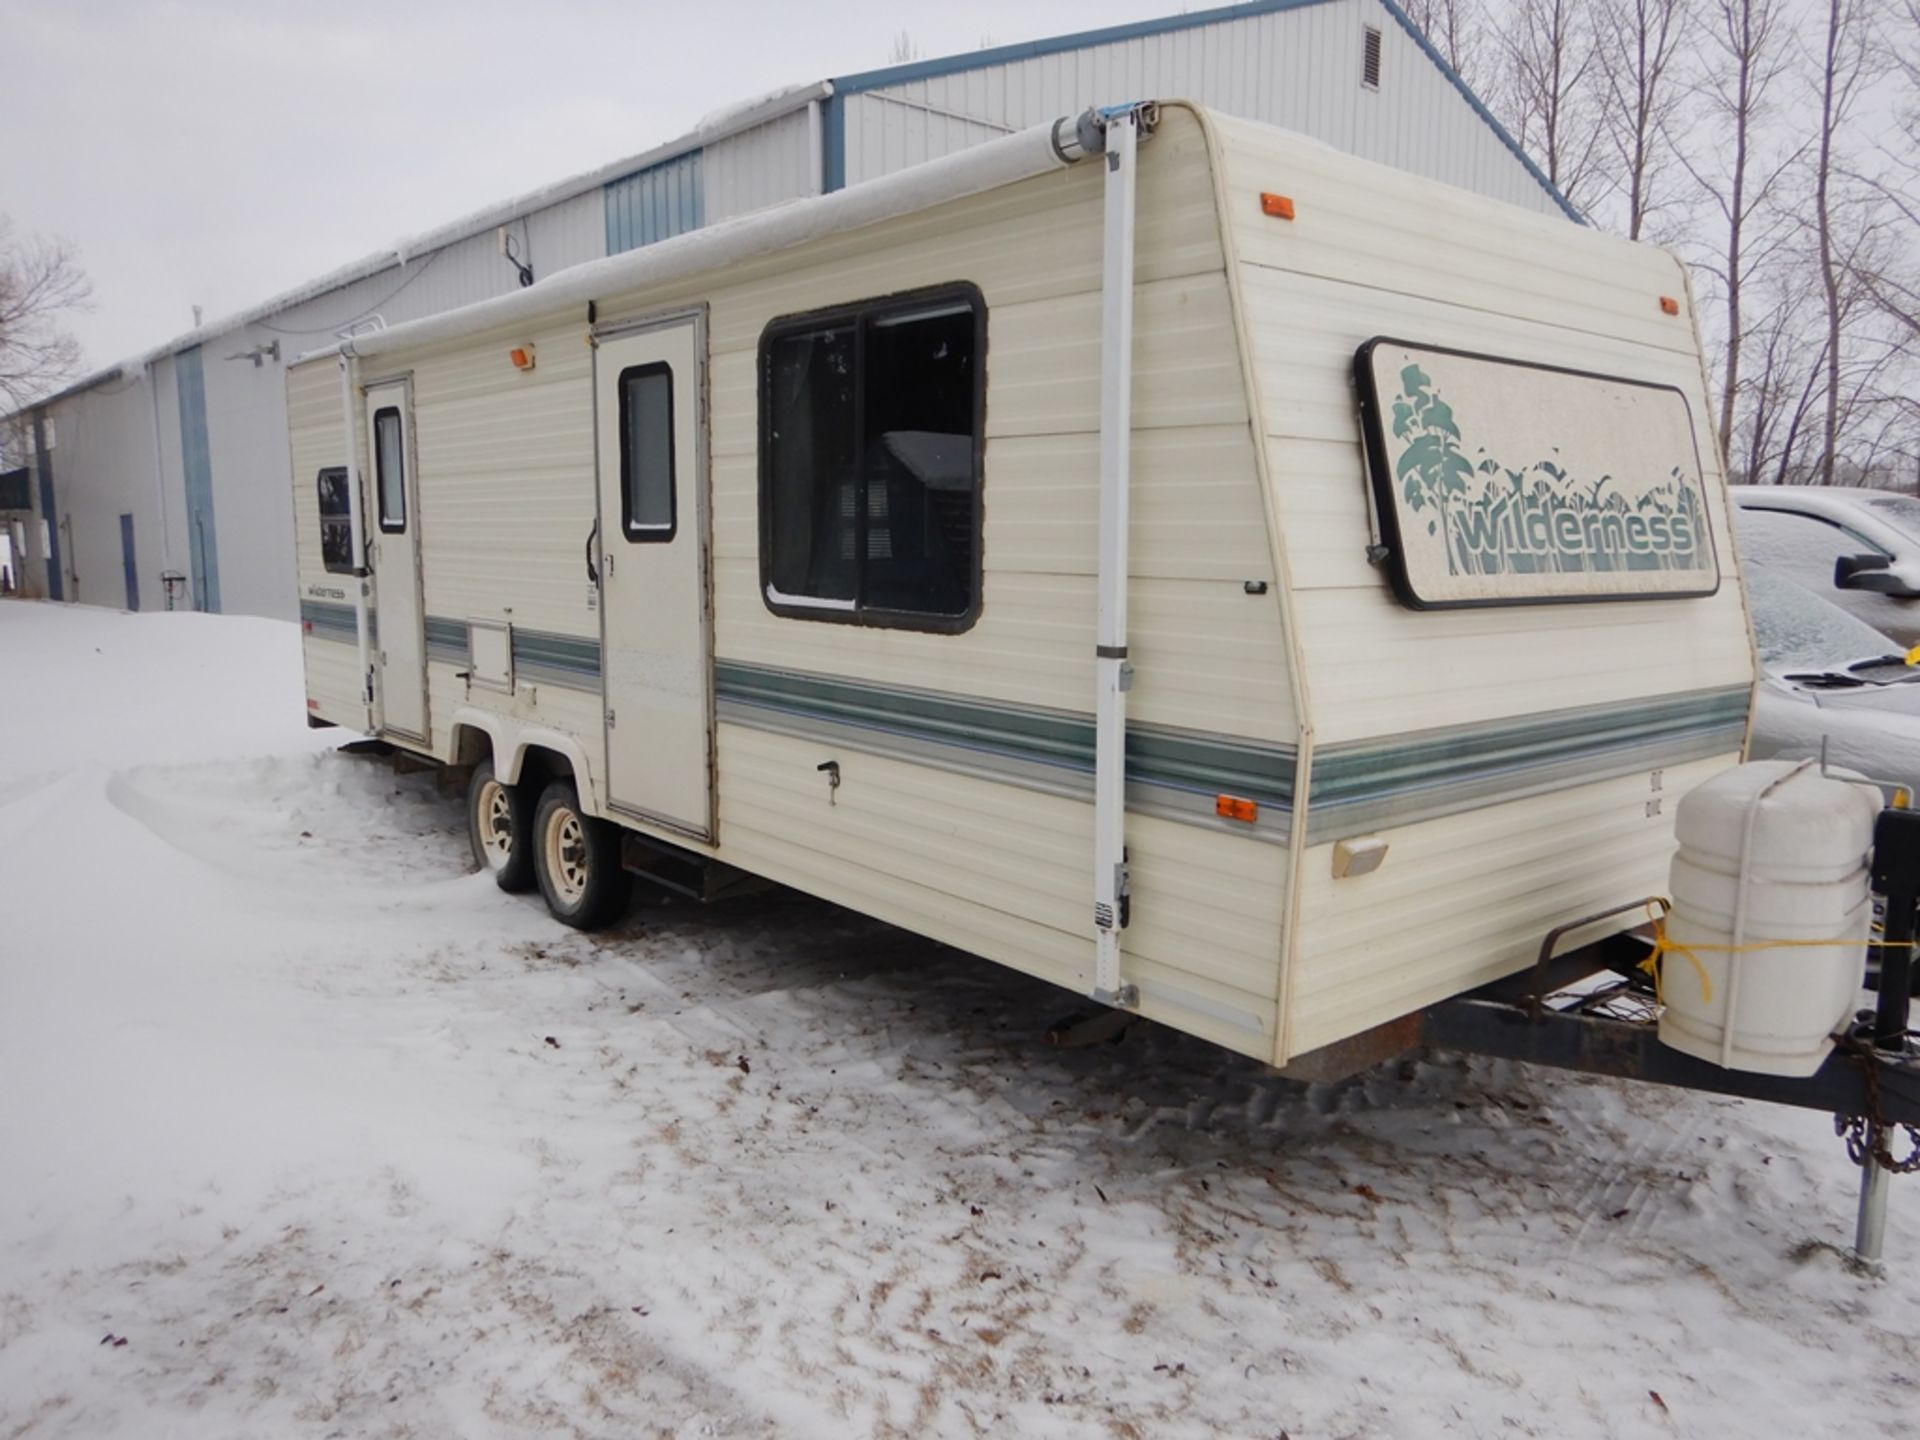 1994 WILDERNESS 26T T/A RECREATIONAL TRAILER, 26FT A/C, FRIDGE, STOVE, MICROWAVE, BUILT-IN SOUND - Image 2 of 4